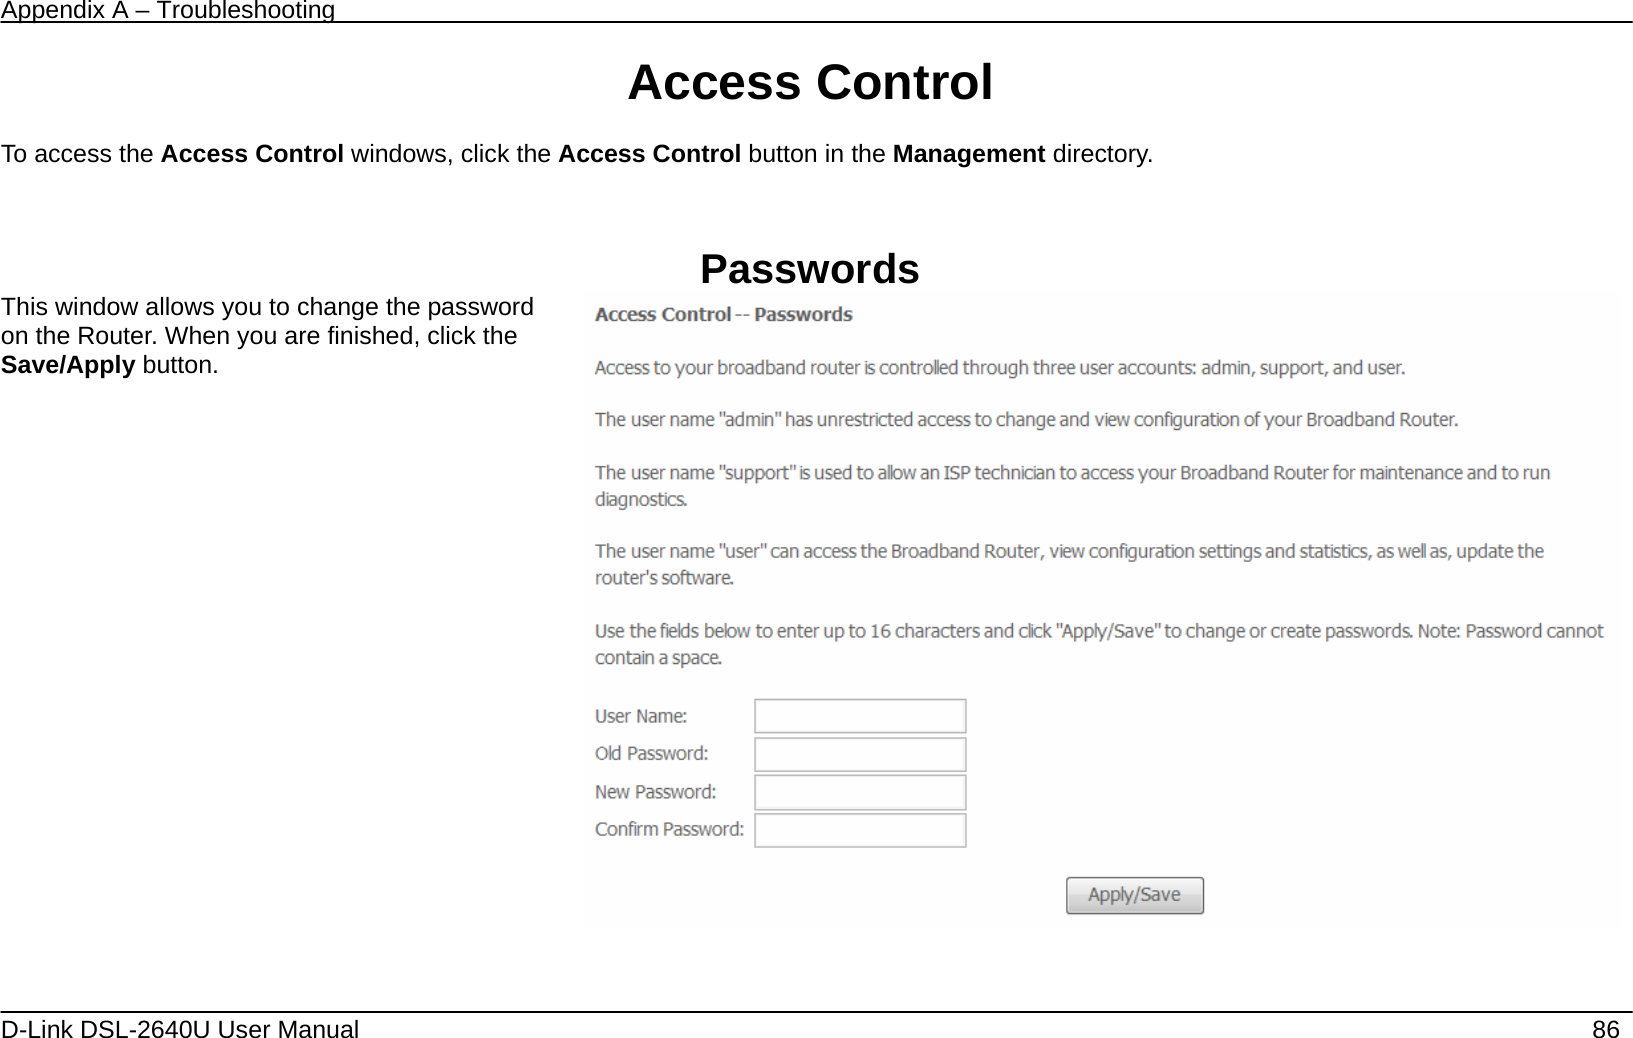 Appendix A – Troubleshooting   D-Link DSL-2640U User Manual    86 Access Control  To access the Access Control windows, click the Access Control button in the Management directory.   Passwords This window allows you to change the password on the Router. When you are finished, click the Save/Apply button.        